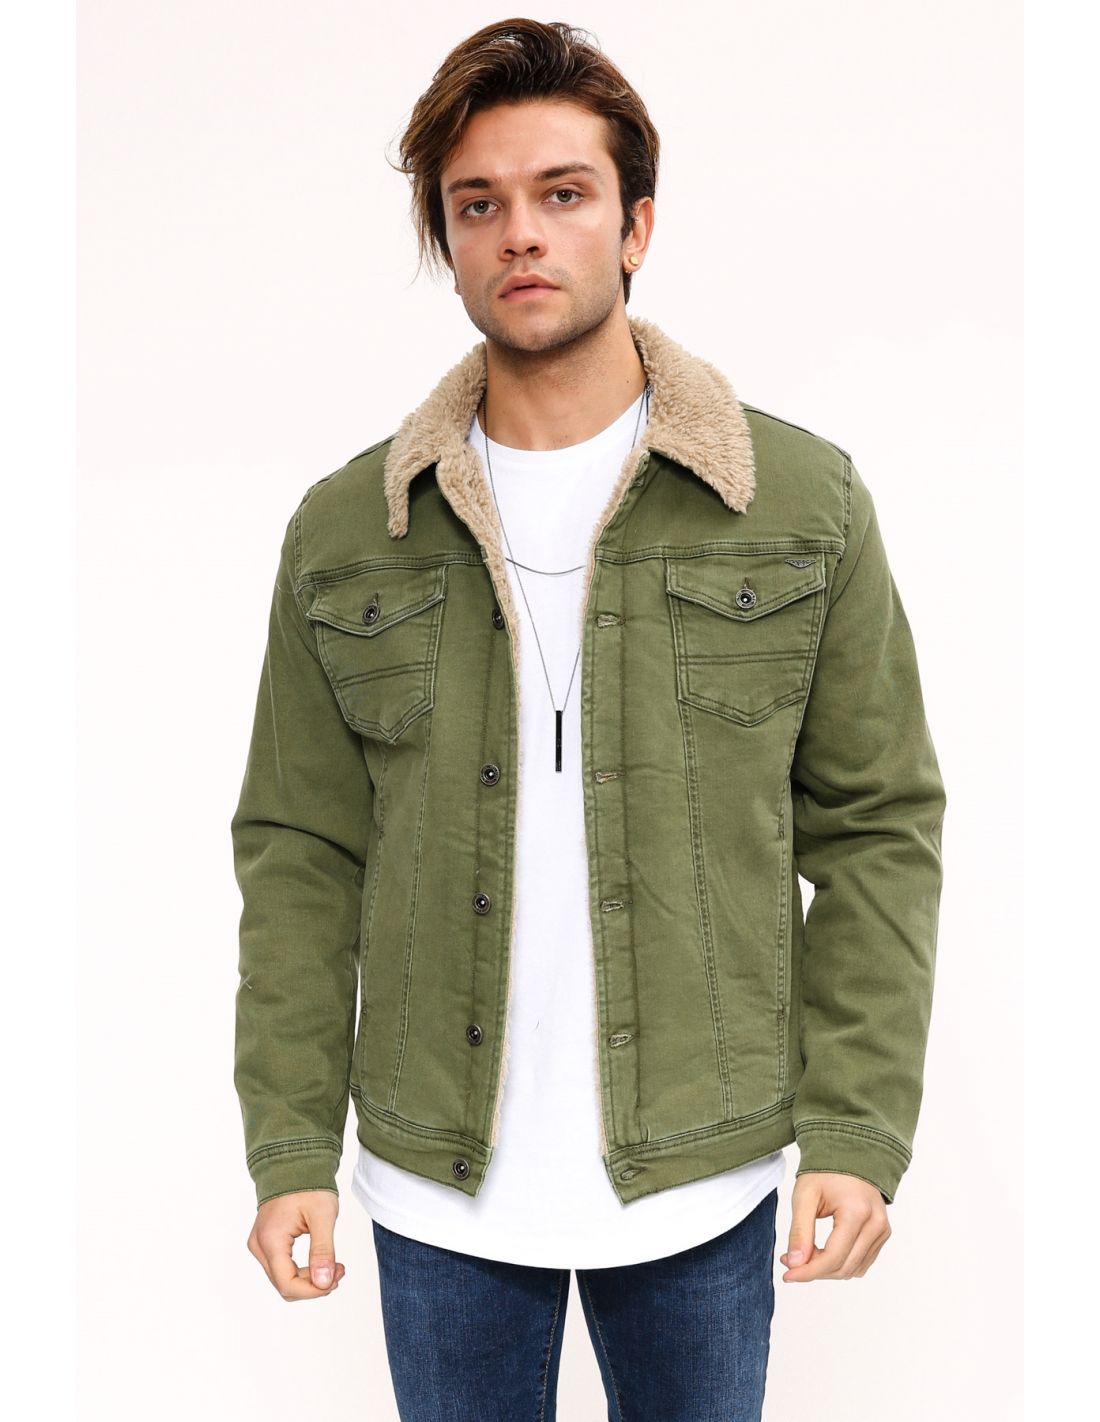 I would like to dye this jacket an Army green, and do a rich brown for the  sherpa. Both parts are 100% cotton. Is there any ways I can dye/lighten the  outside